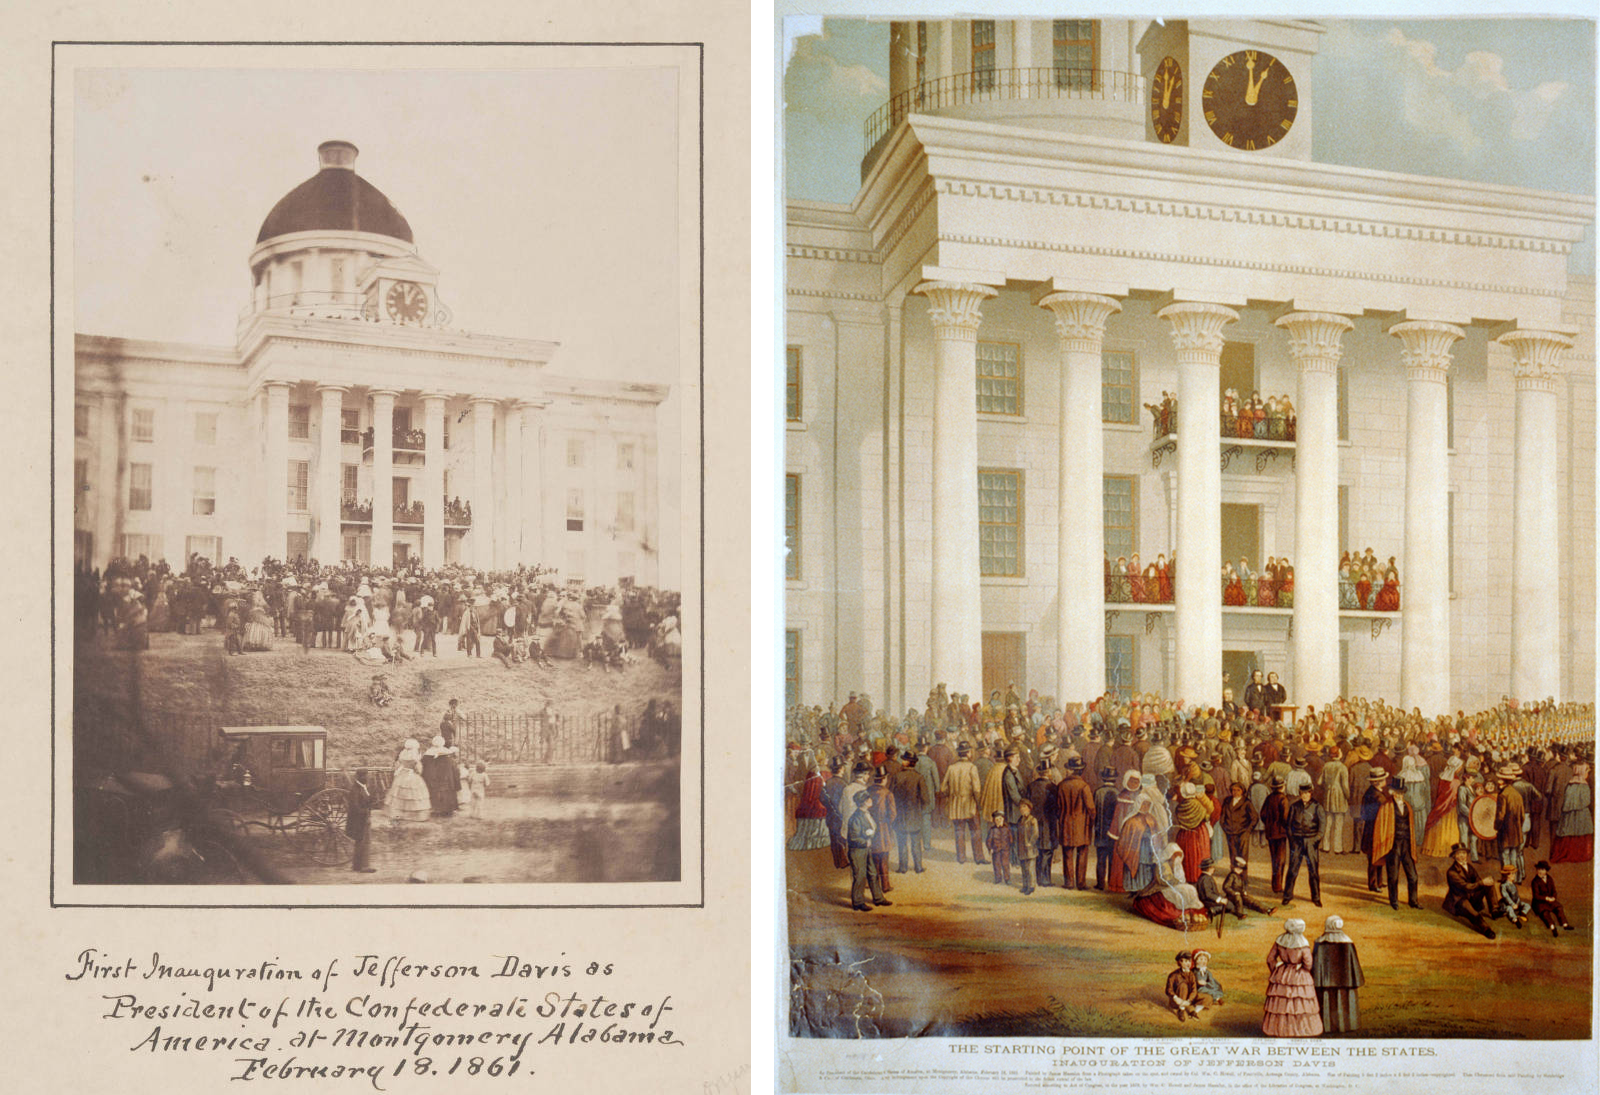 Left: A. C. McIntyre, First inauguration of Jefferson Davis as President of the Confederate States of America at Montgomery, Alabama, February 18, 1861 (photographic print, 19.9 x 14.7 cm (Boston Athenaeum); right: The starting point of the great war between the states: the inauguration of Jefferson Davis, 1878, chromolithograph, 76.6 x 60.8 cm (Library of Congress)